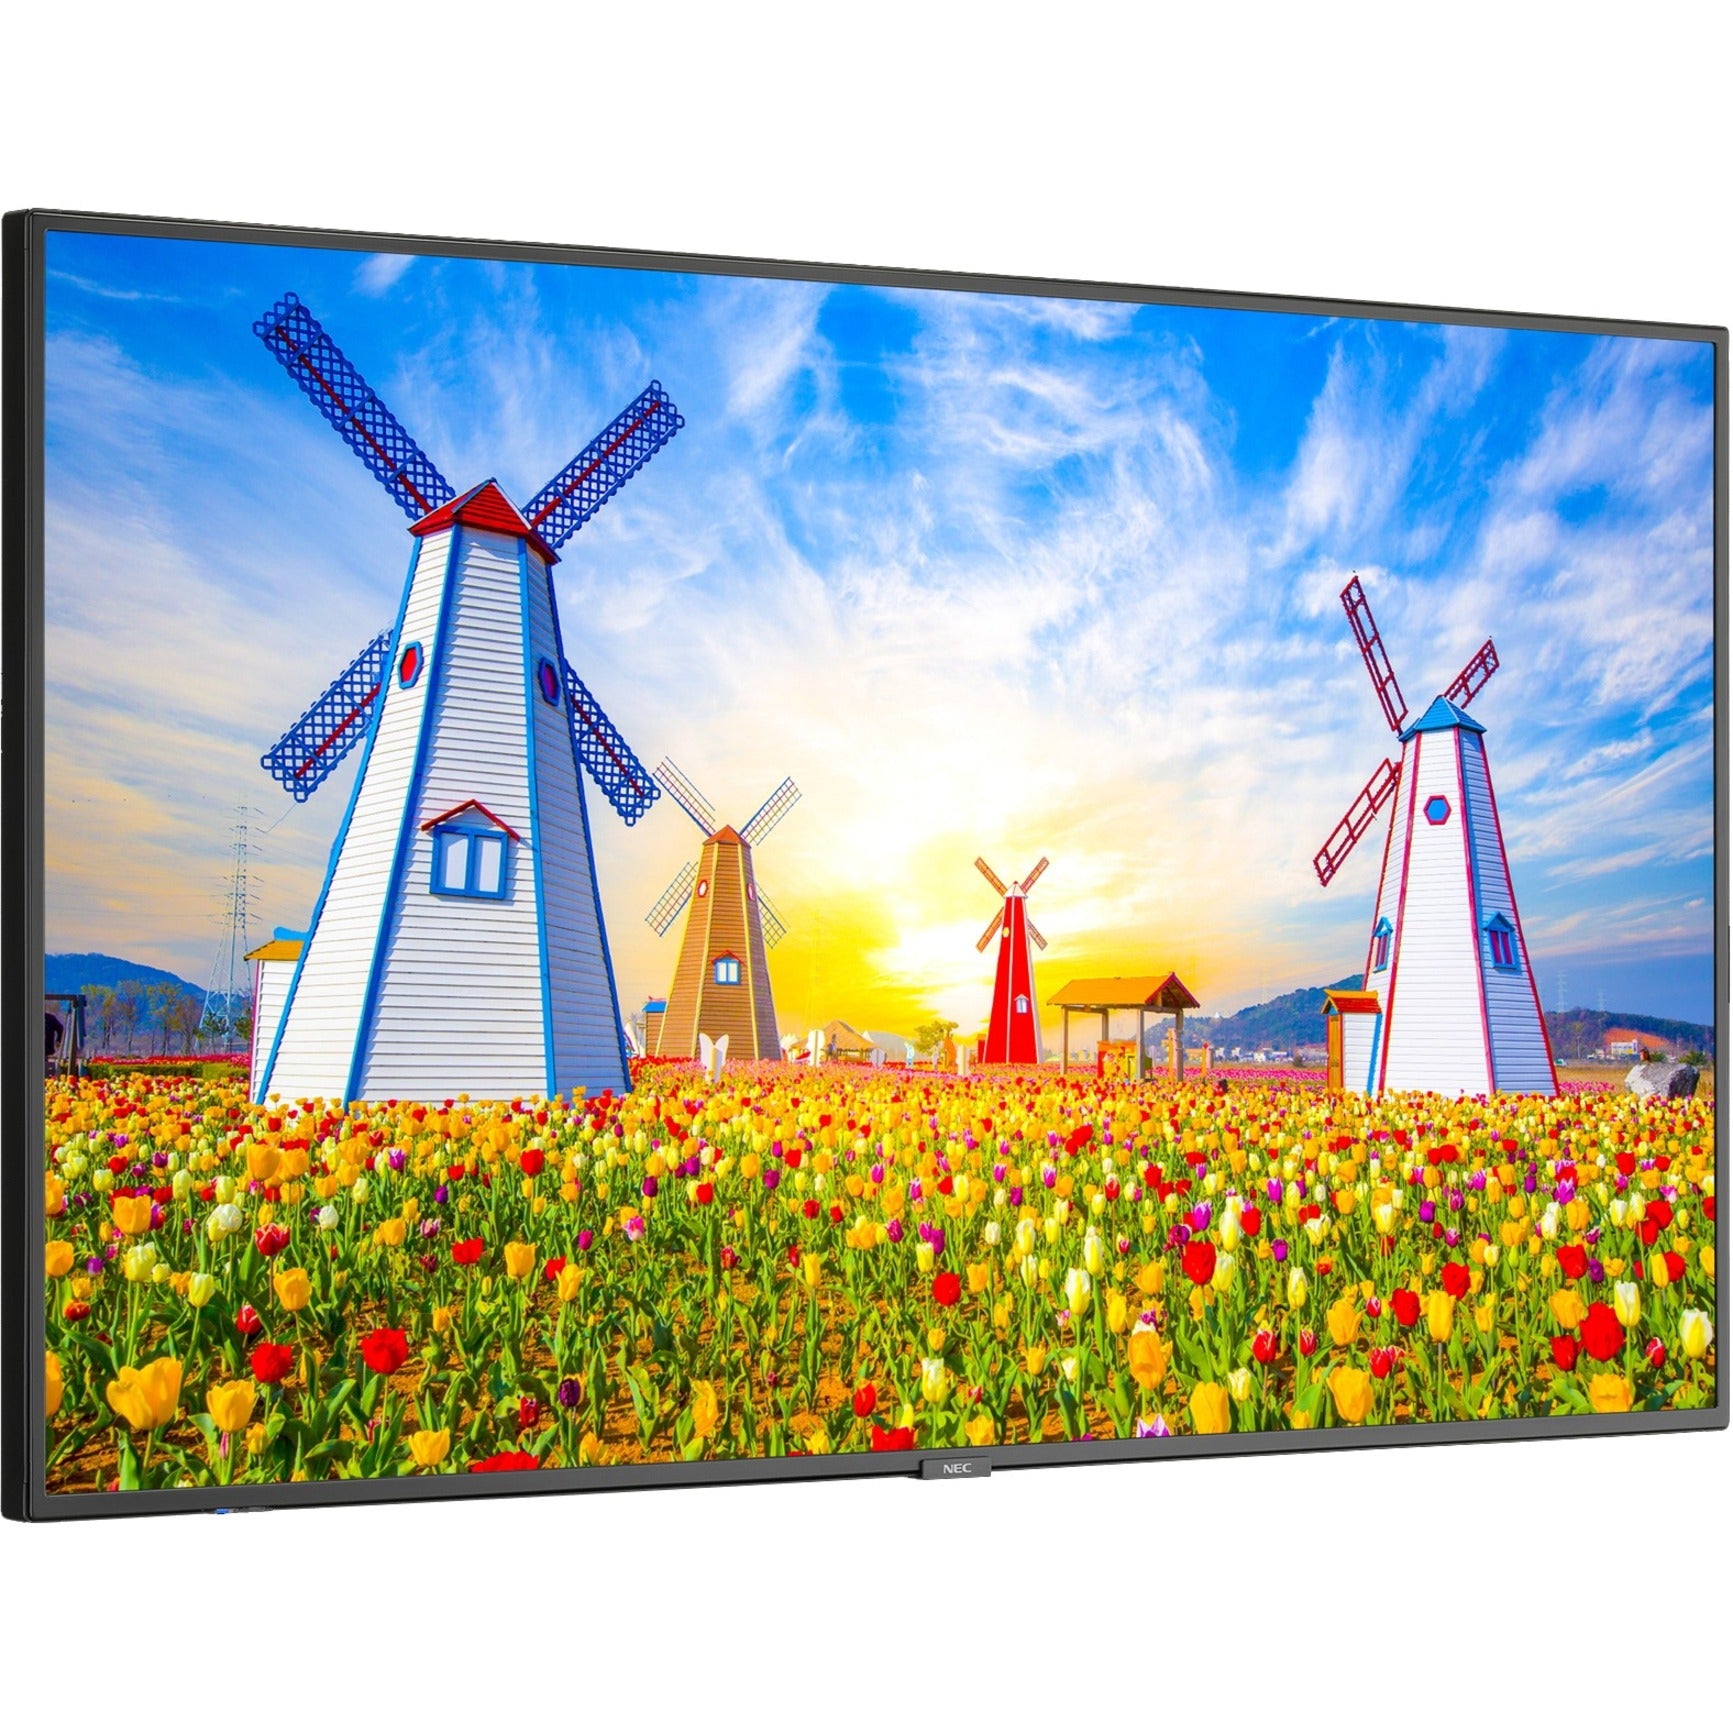 NEC Display M651-AVT3 65" Ultra High Definition Professional Display with Integrated ATSC/NTSC Tuner, 500 Nit Brightness, 8-bit+FRC Color Depth, 2160p Scan Format